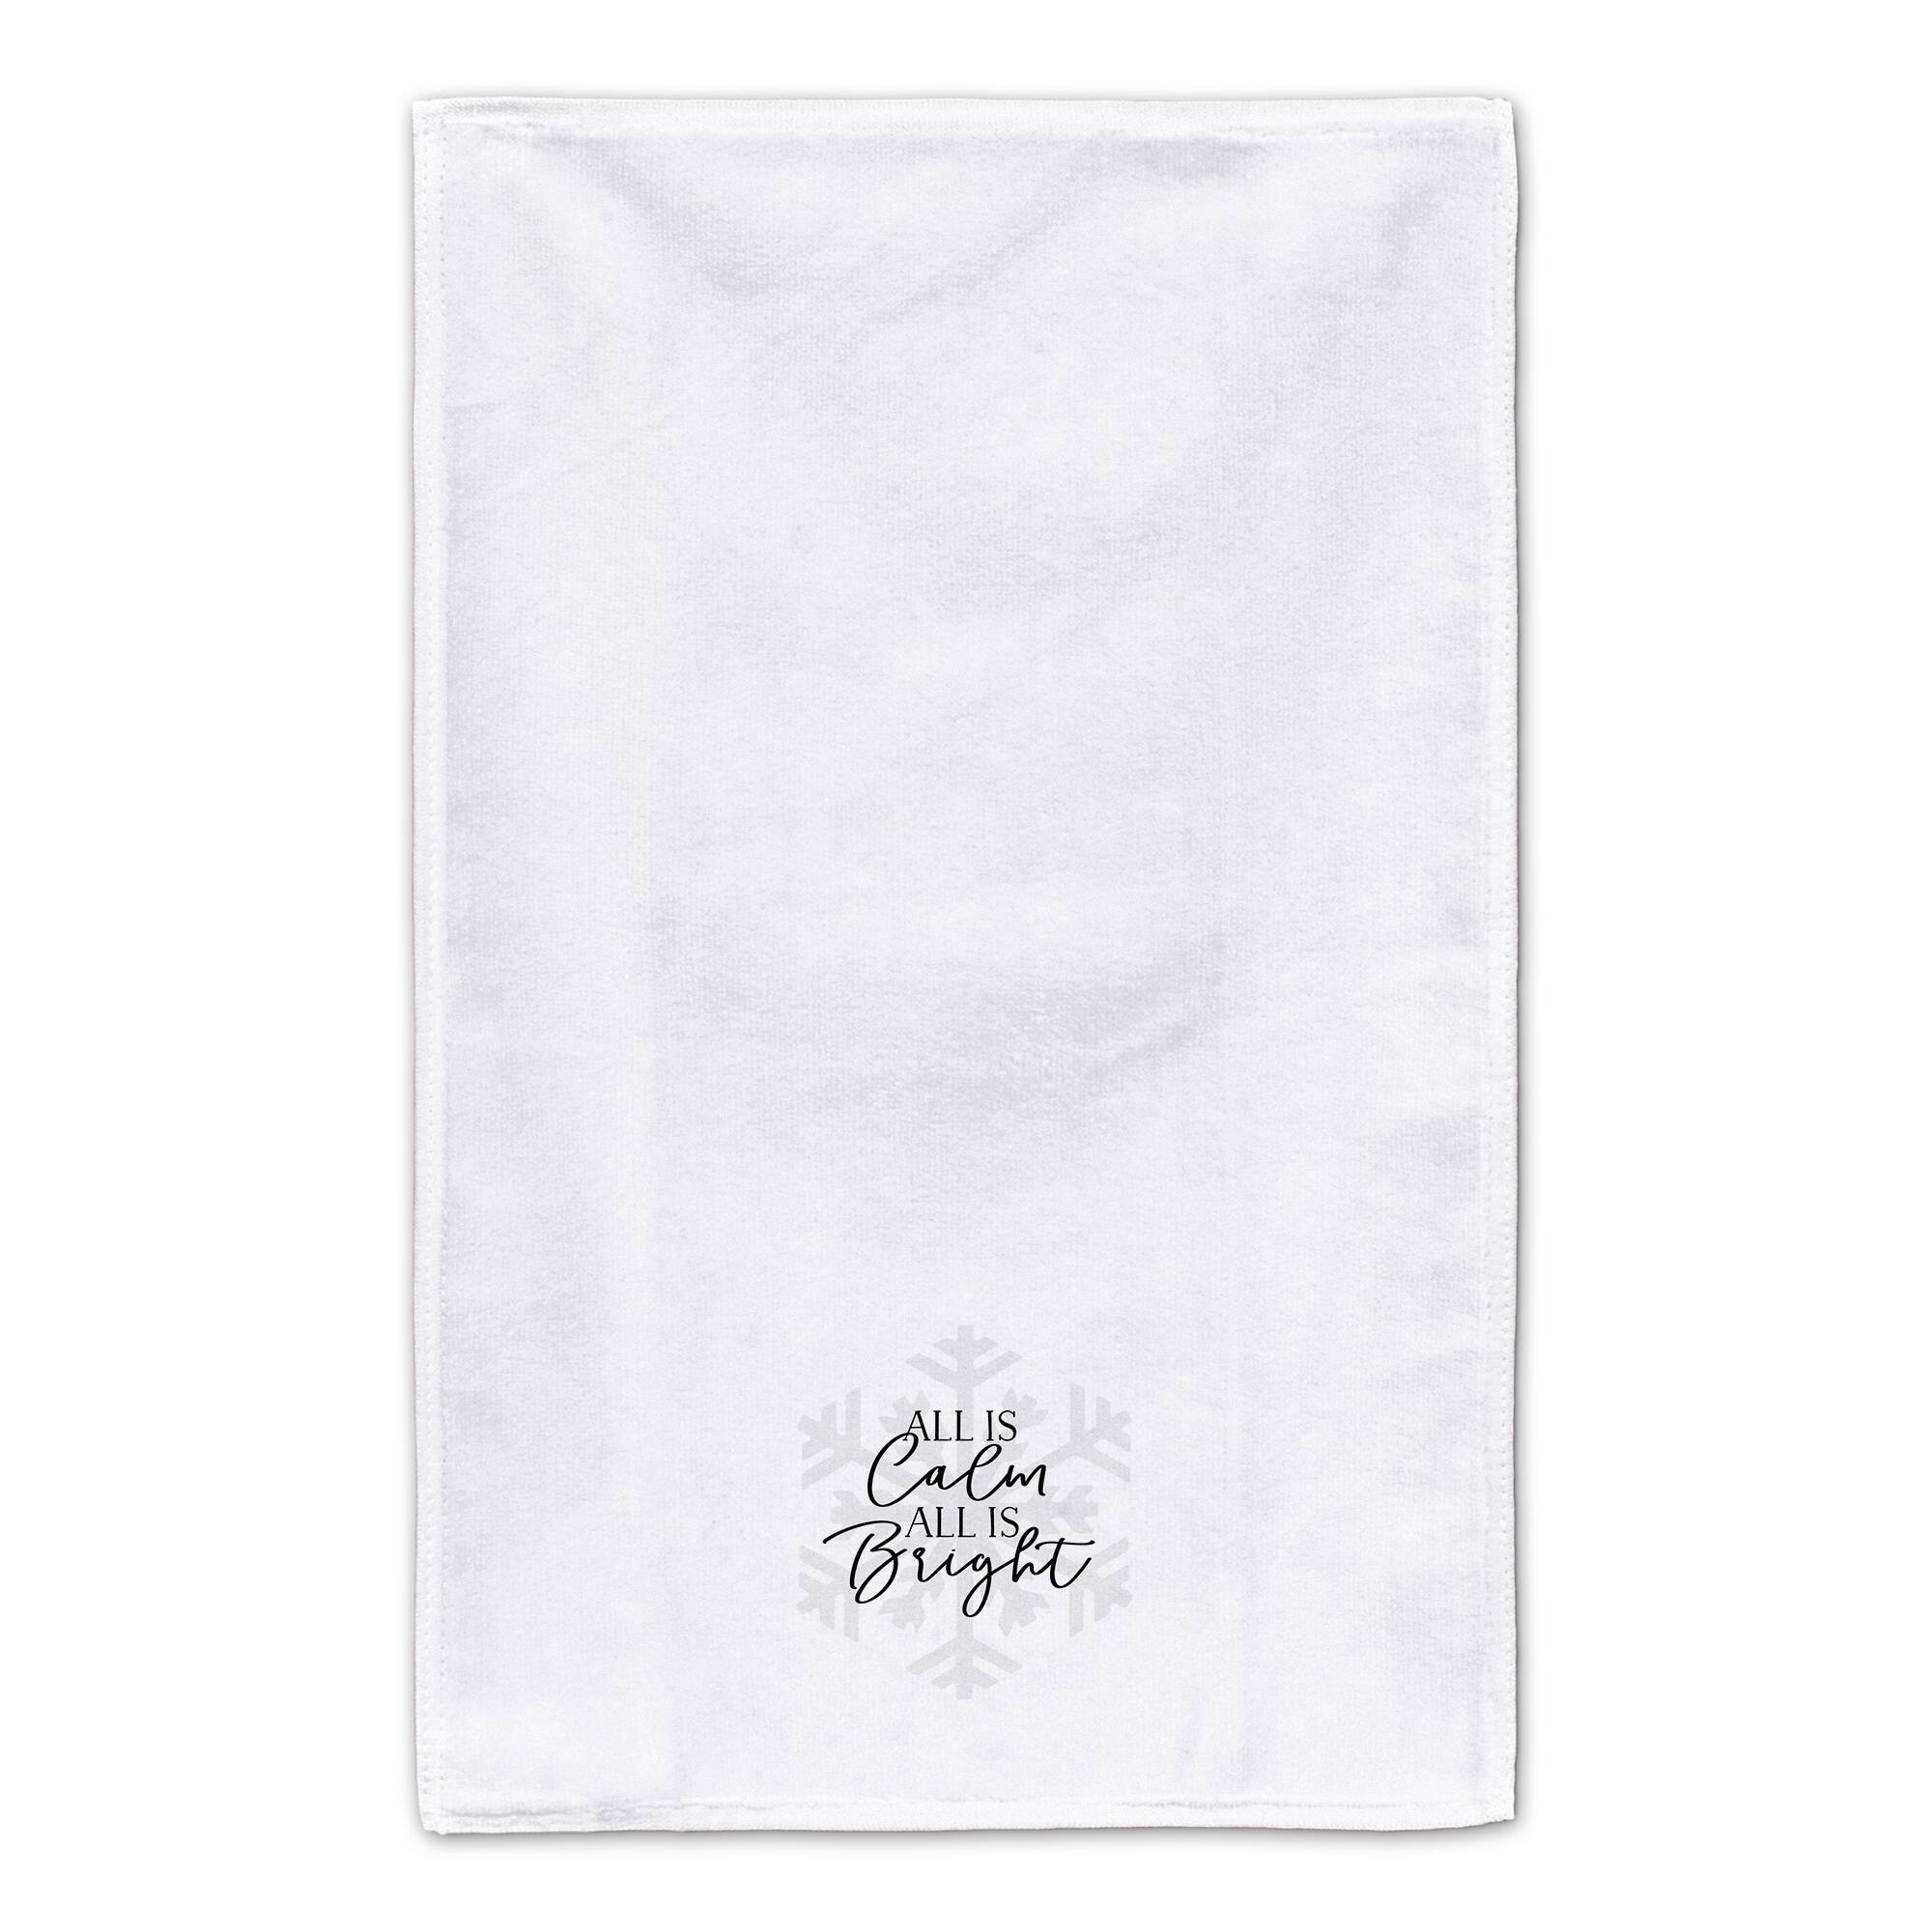 All is Calm All is Bright Tea Towels - Set of 2